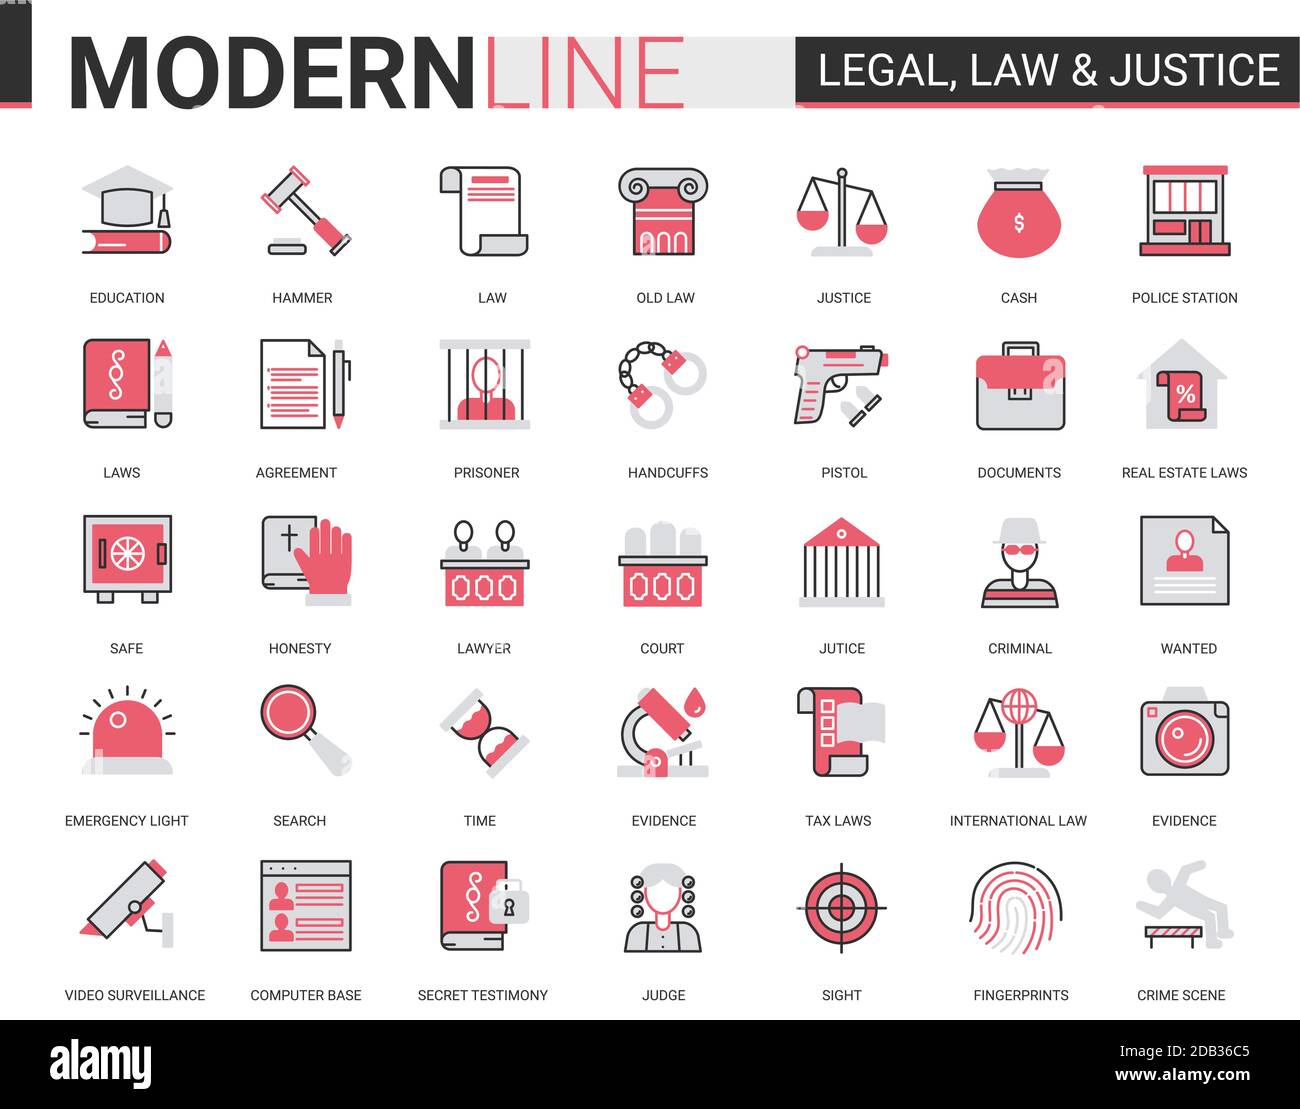 Legal law and justice flat line icon vector illustration set. Red black infographic design of mobile app website symbols with judicial legislation education, lawyer defense, police investigation Stock Vector